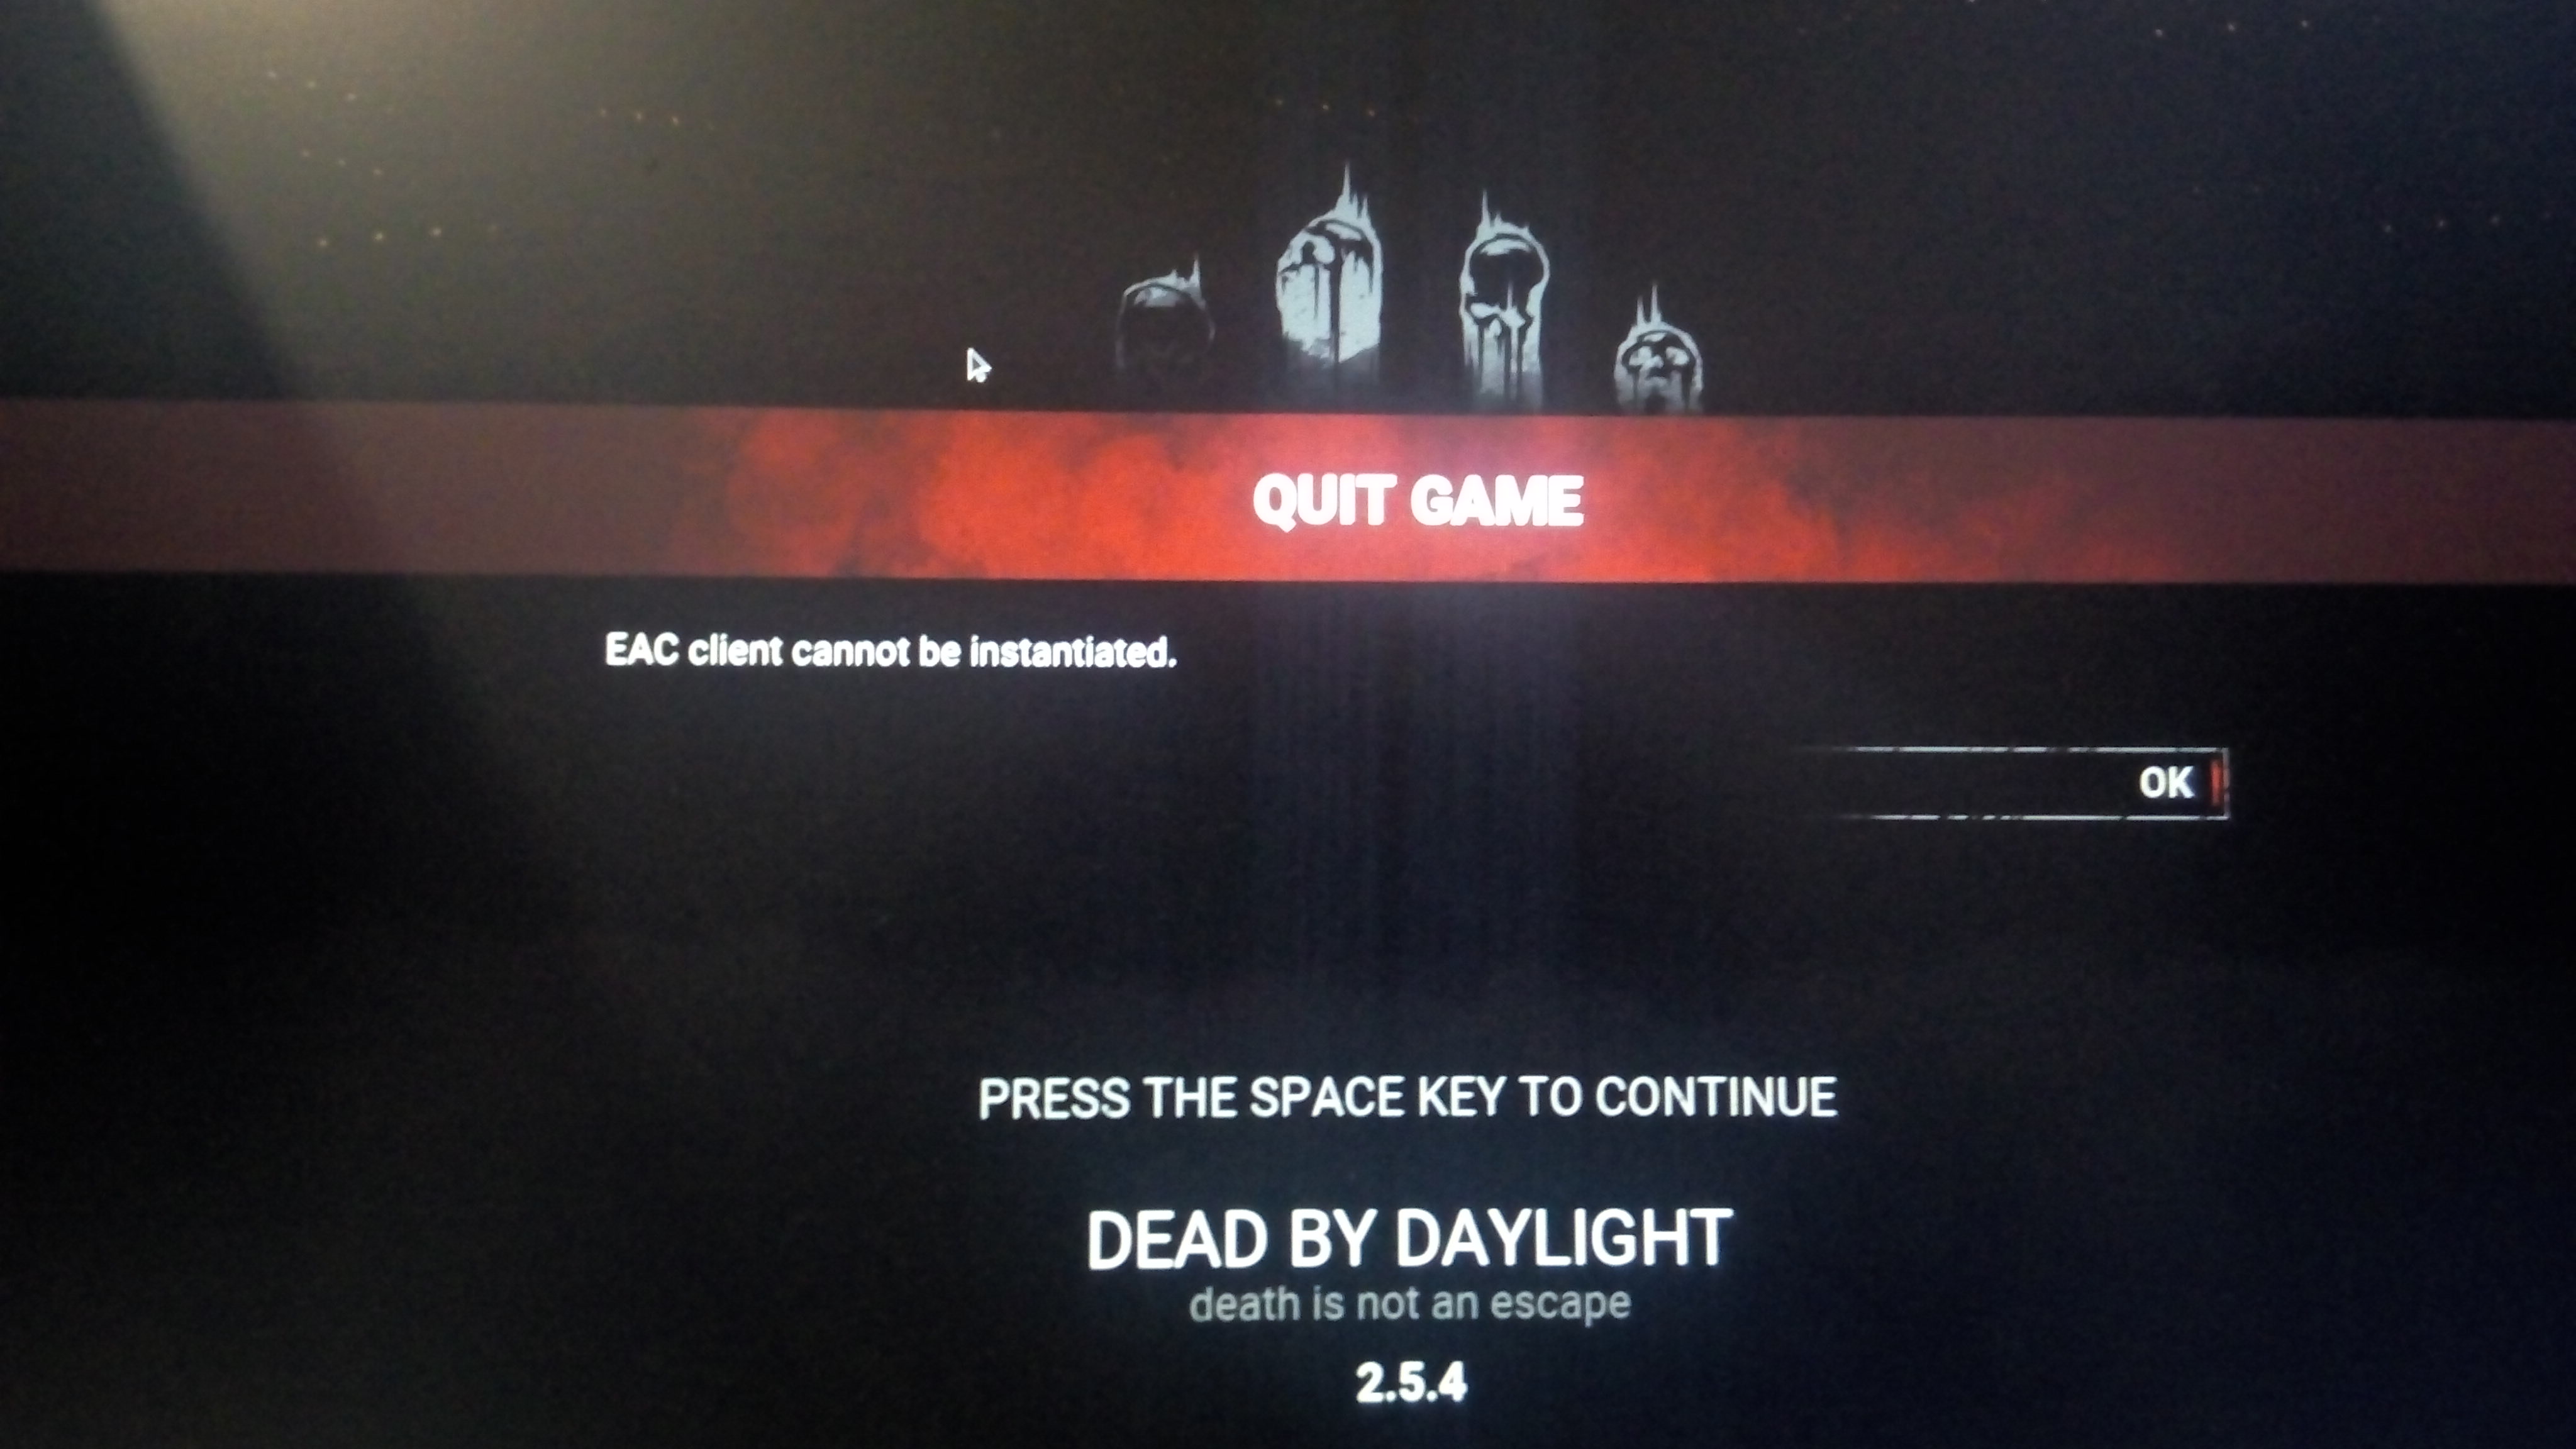 Disconnected eac client. Неизвестная ошибка Dead by Daylight. Дбд Неизвестная ошибка. Обновление стим свыше года Dead by.